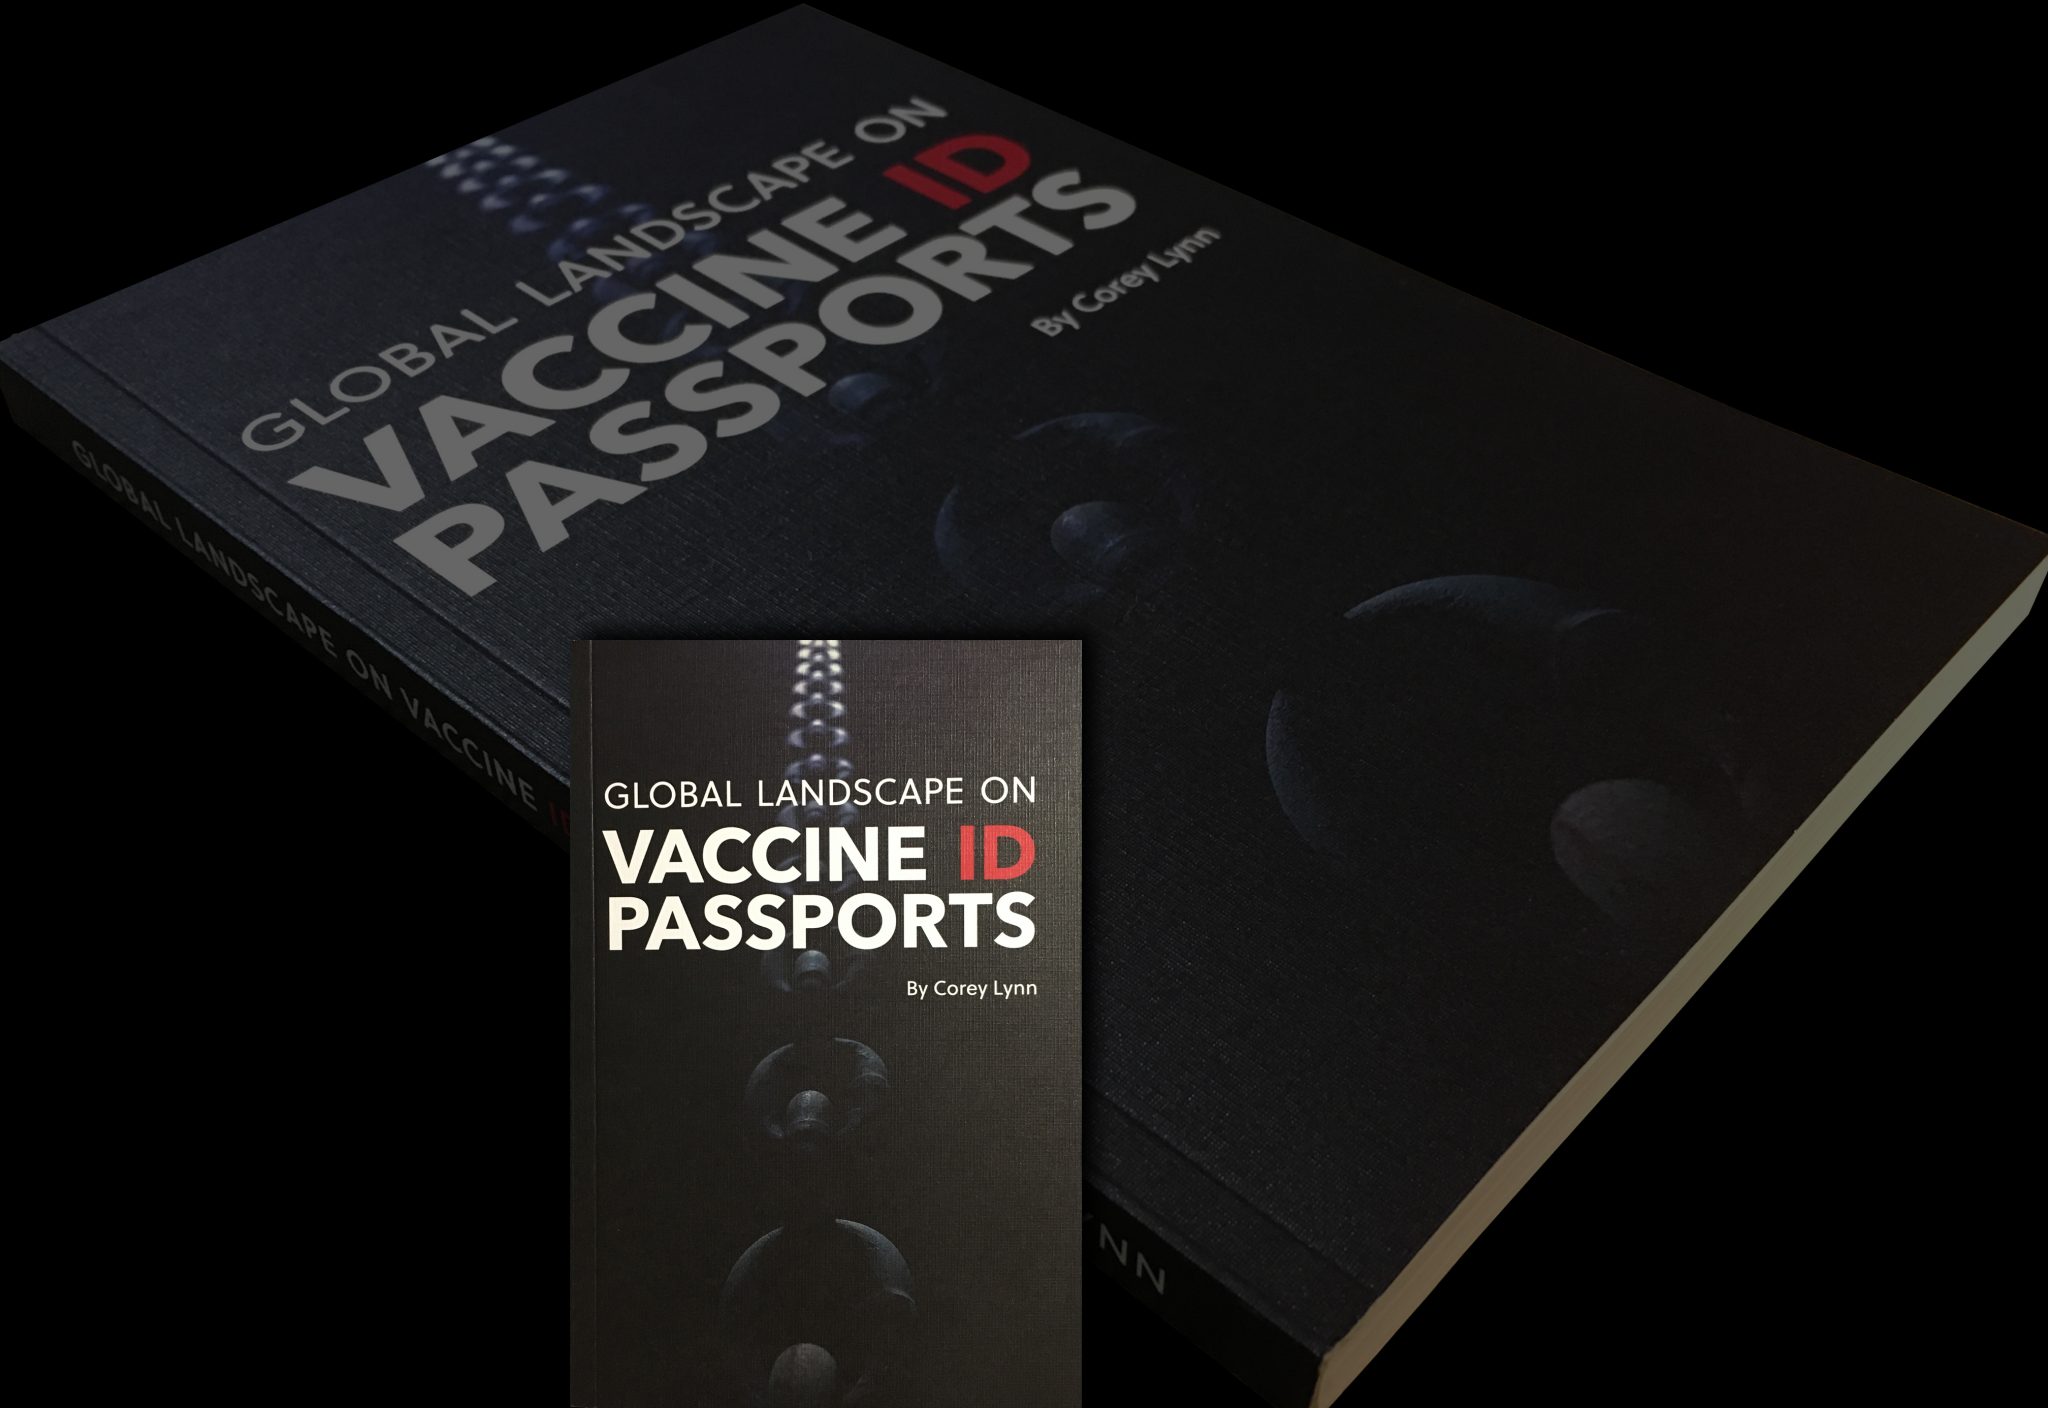  Corey Lynn’s Book on Vaccine ID Passports and Where It’s Headed is Now Available!